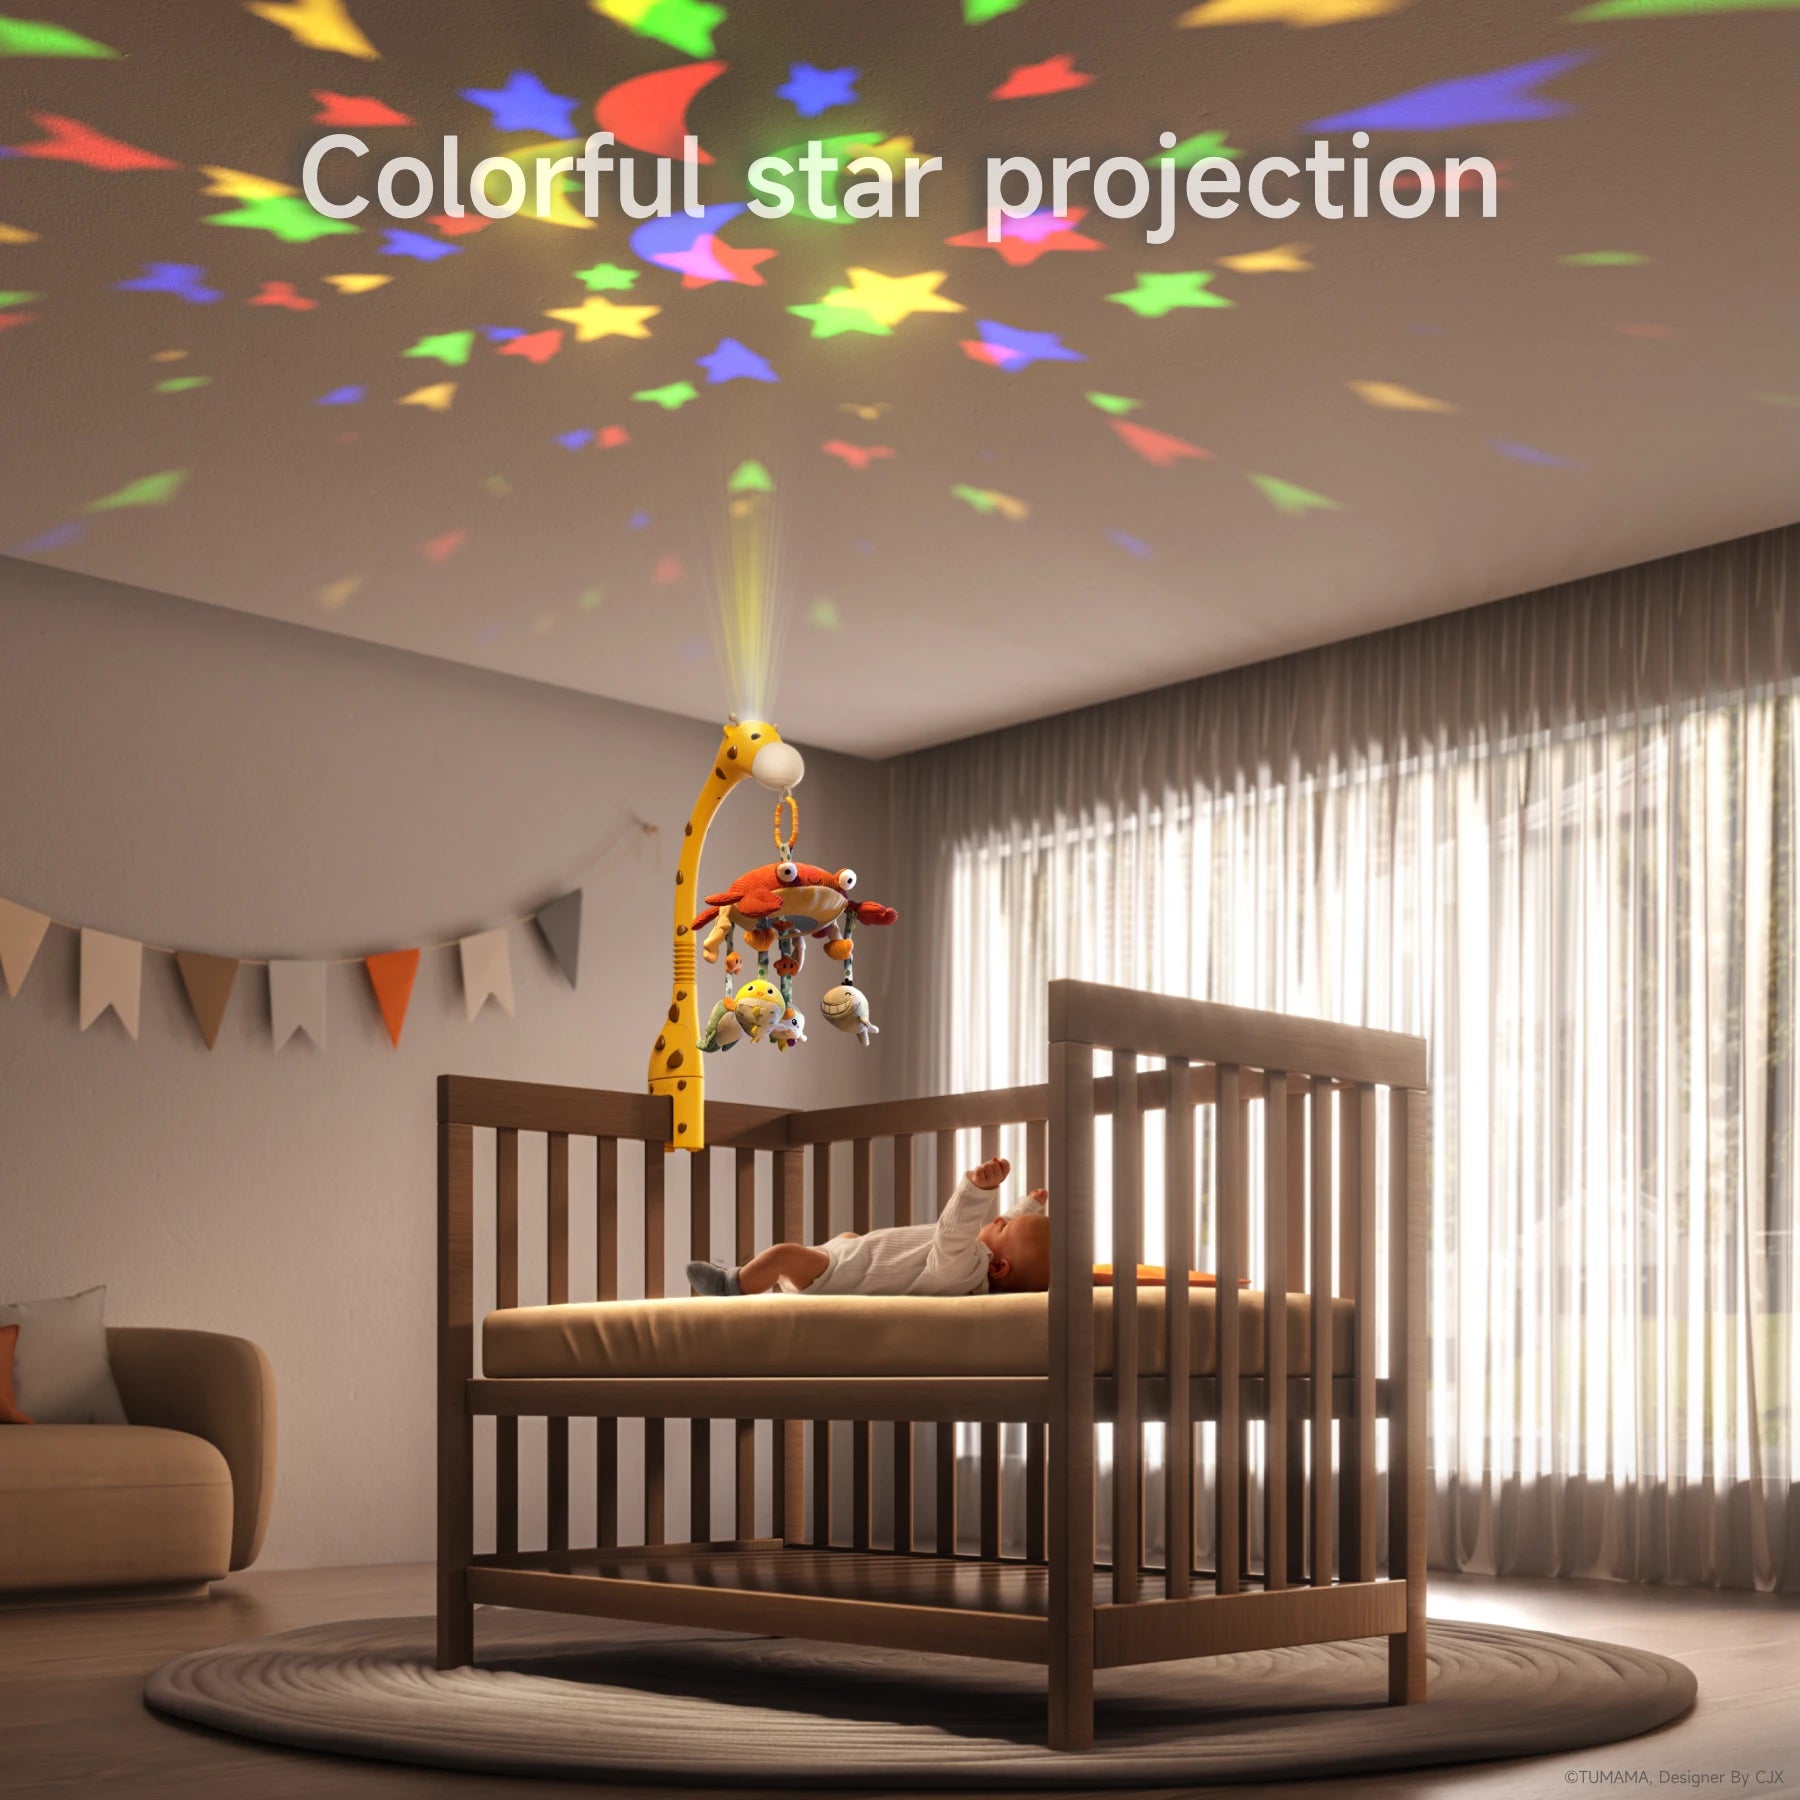 Baby lying on bed looking at glow-in-the-dark projector